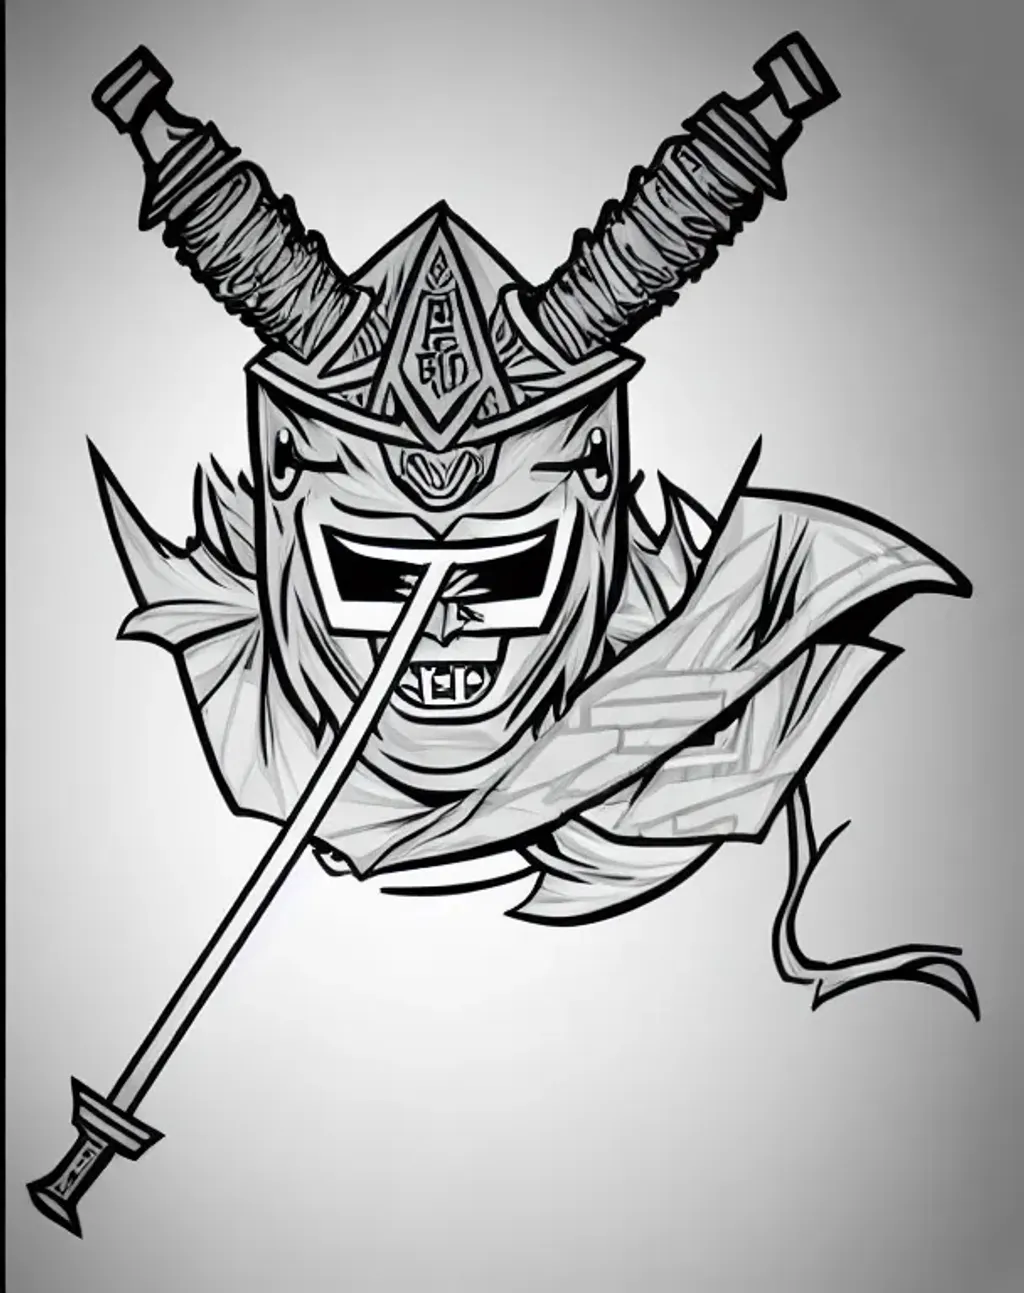 Oni mask, two swords crossing through the mask, Blac... | OpenArt